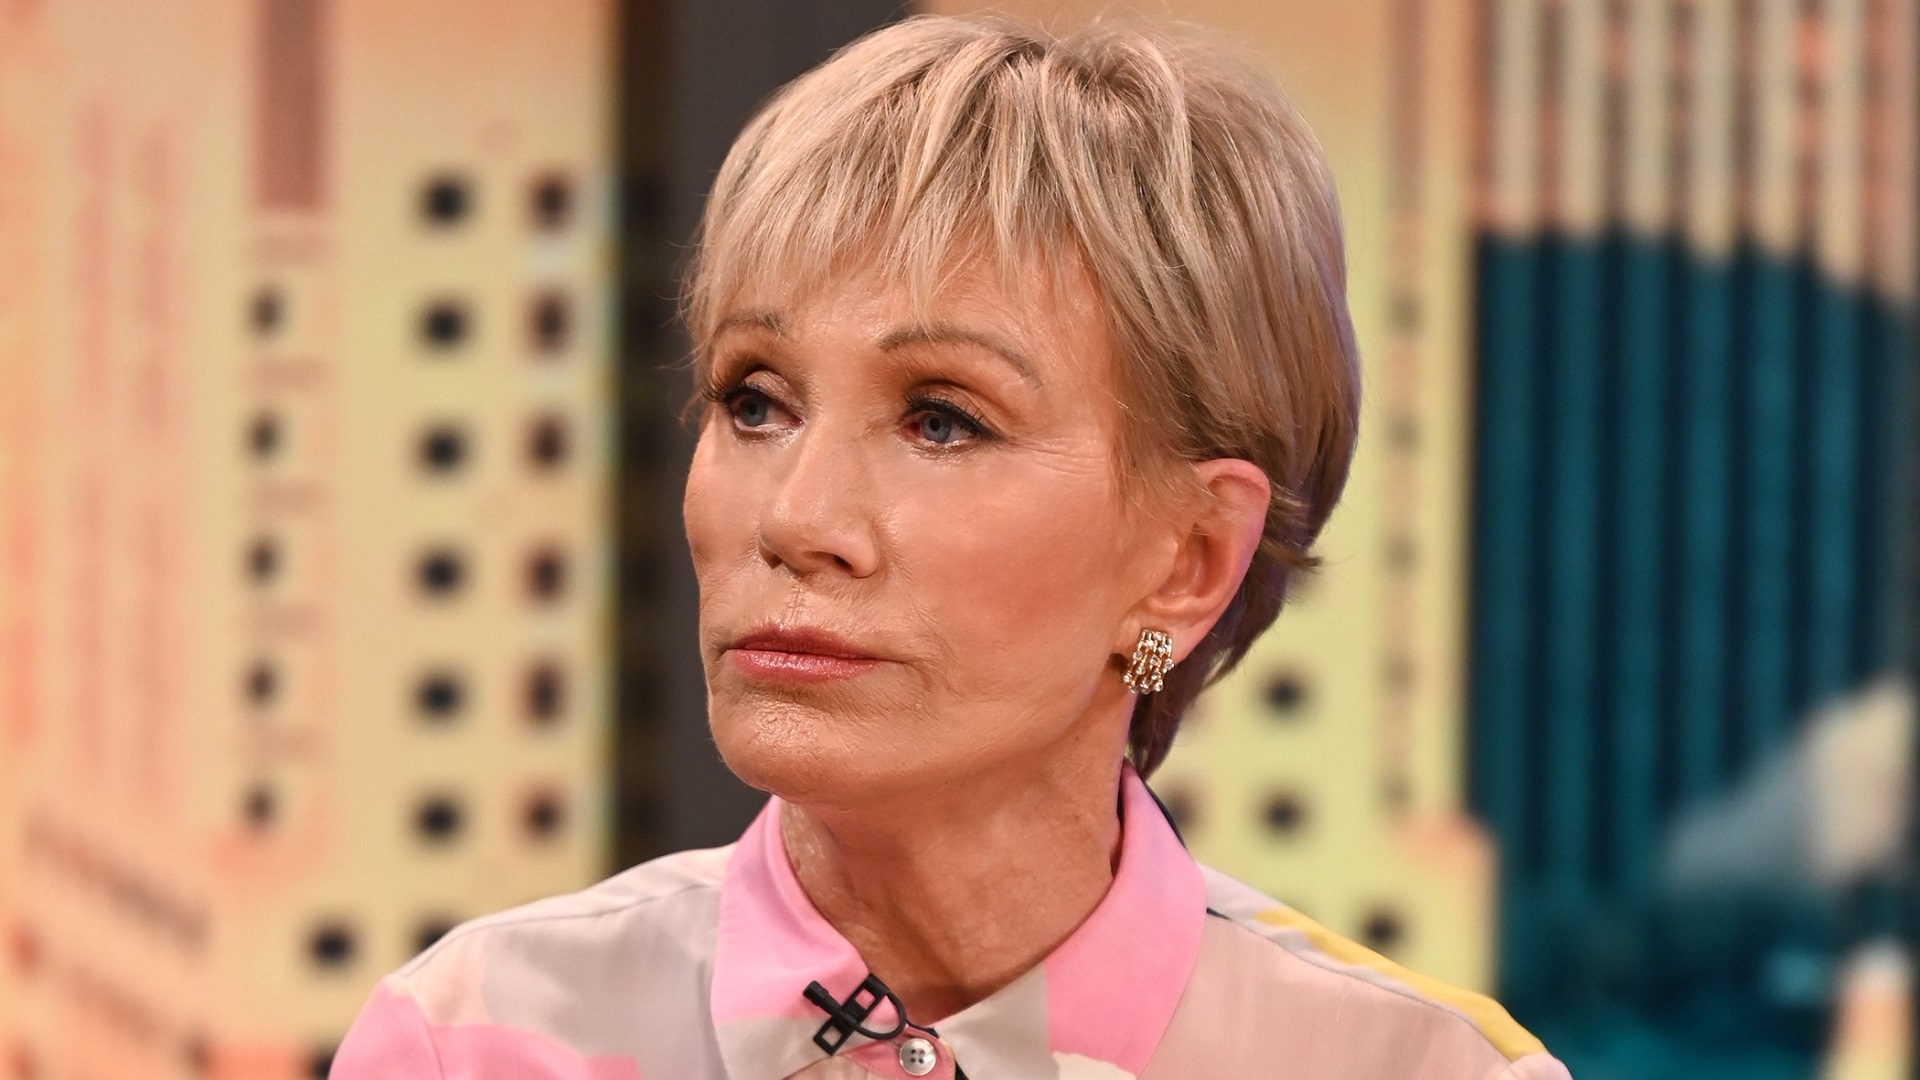 Barbara Corcoran Says 'You Can't Feel Sorry for Yourself' After Being ...